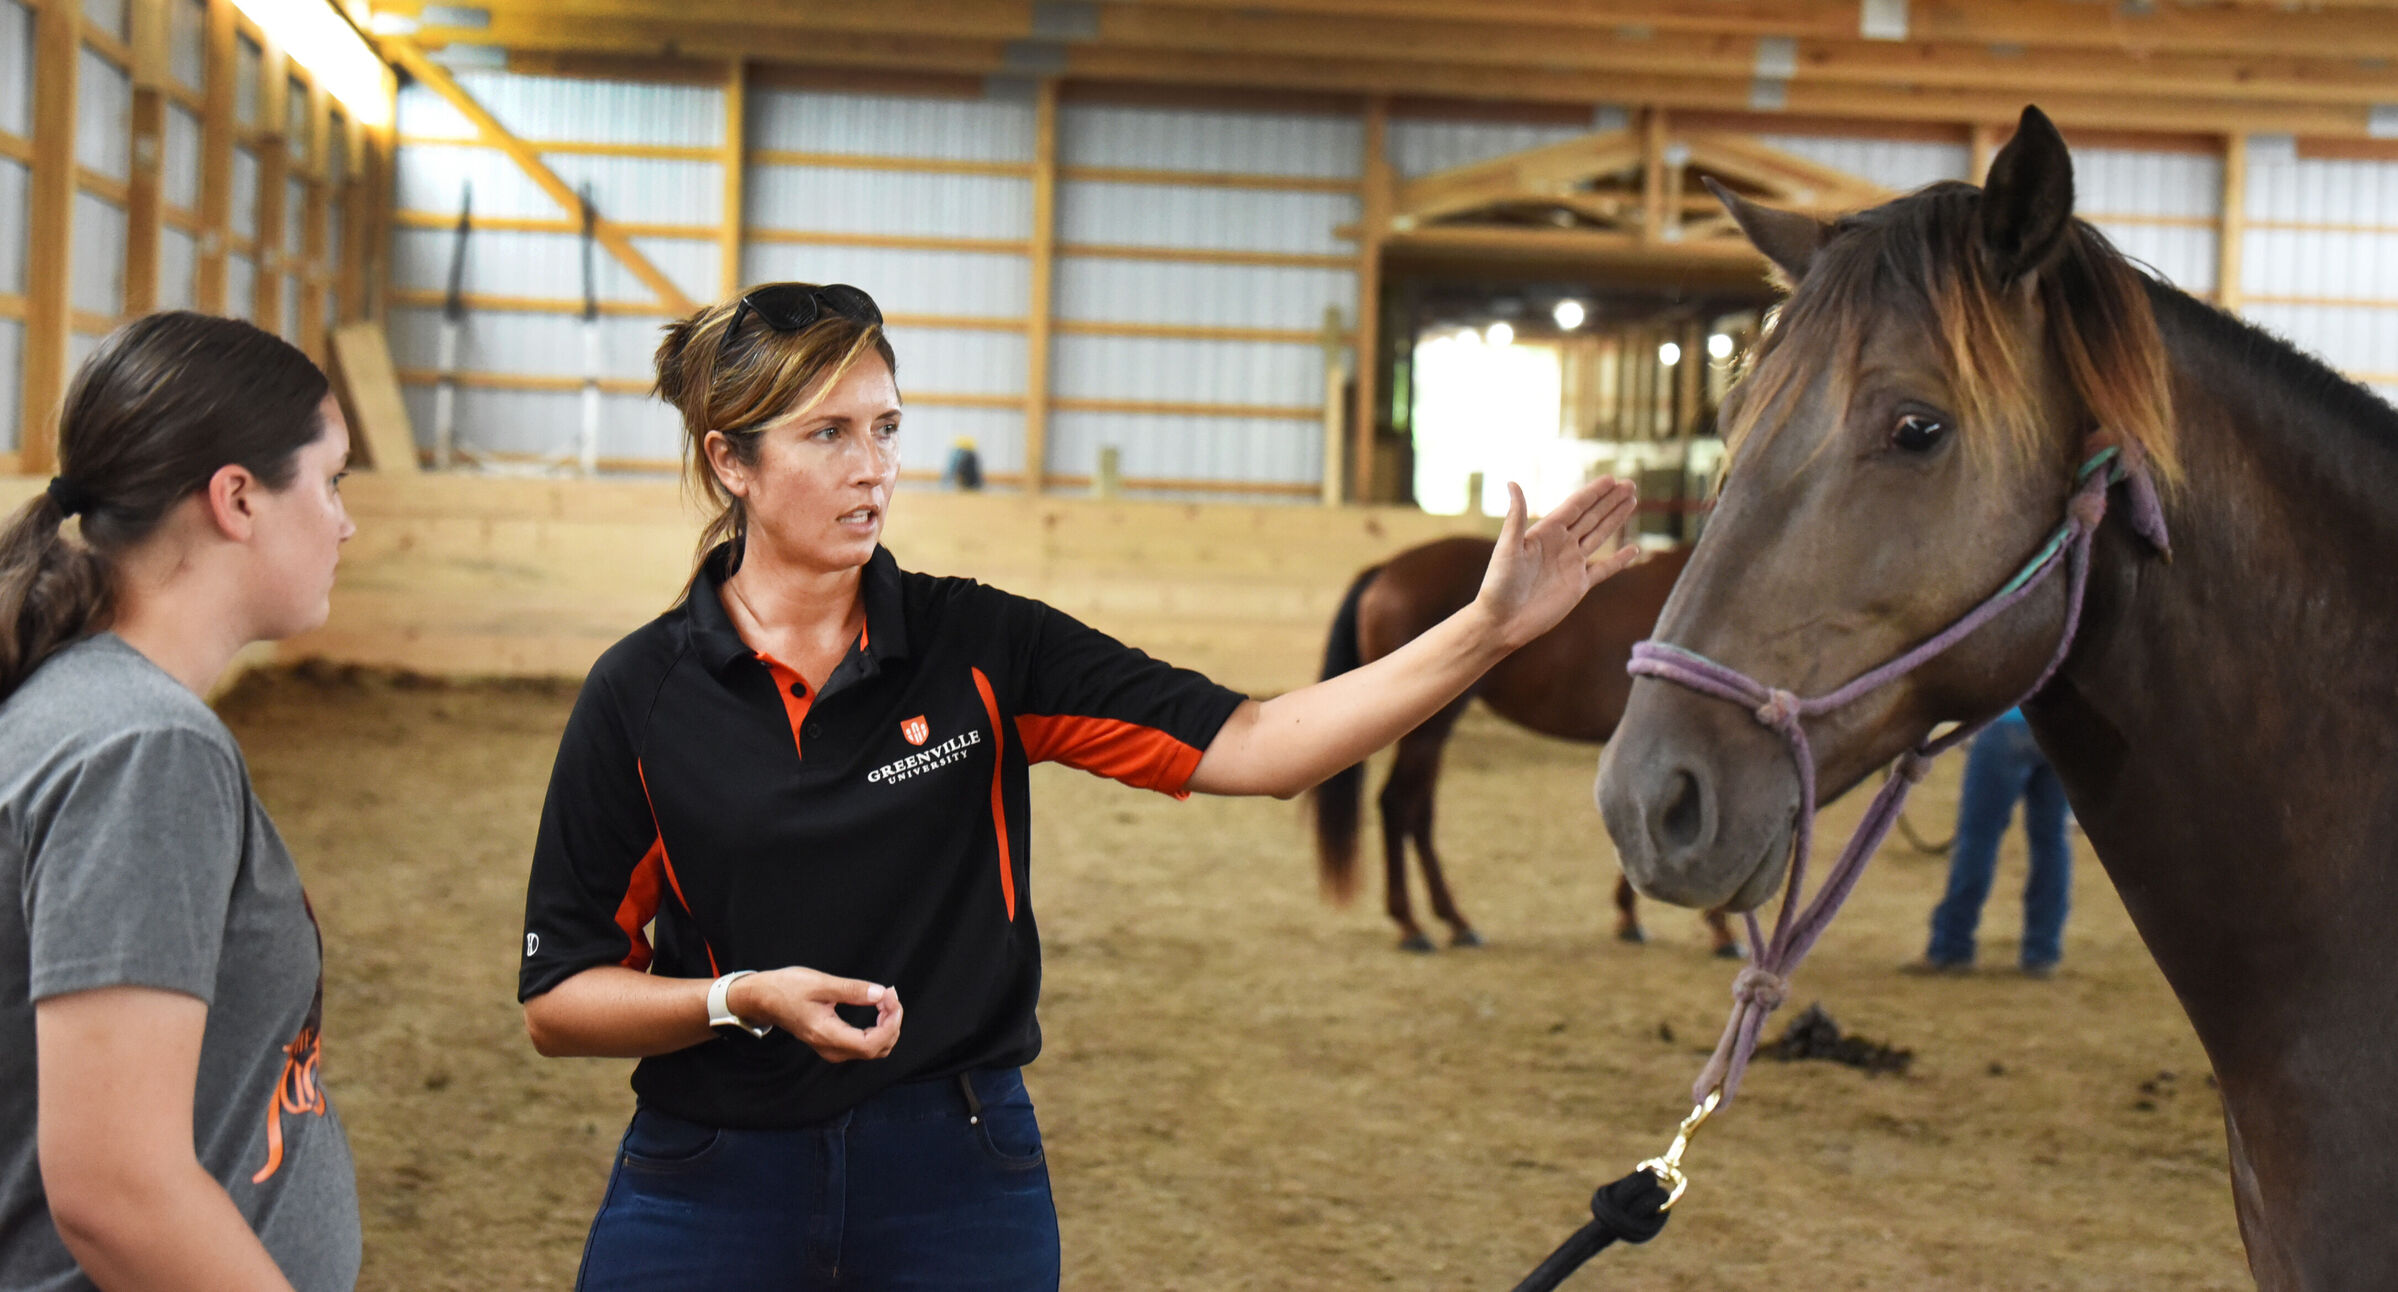 GU's Equine Program is off to a galloping start